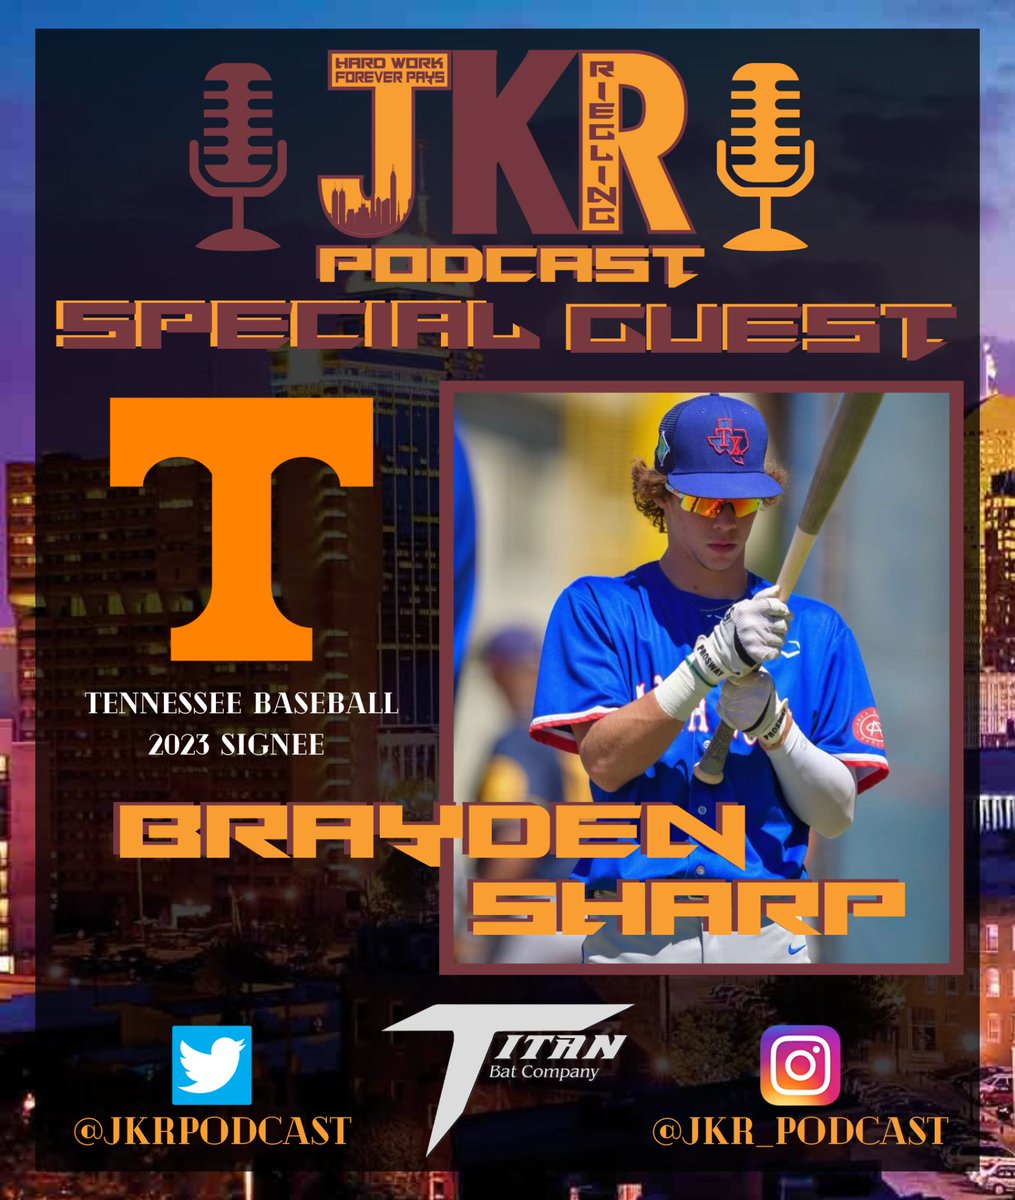 ‼️ SPECIAL GUEST ‼️

Make sure to tune into today’s episode with 2023 Tennessee Baseball Signee @b_sharp27 . We discuss his Texas High School baseball, Area Code Games vs PDP, baseball cards, and much more! Tune in on Apple Podcasts and Spotify! @BanditoBaseball